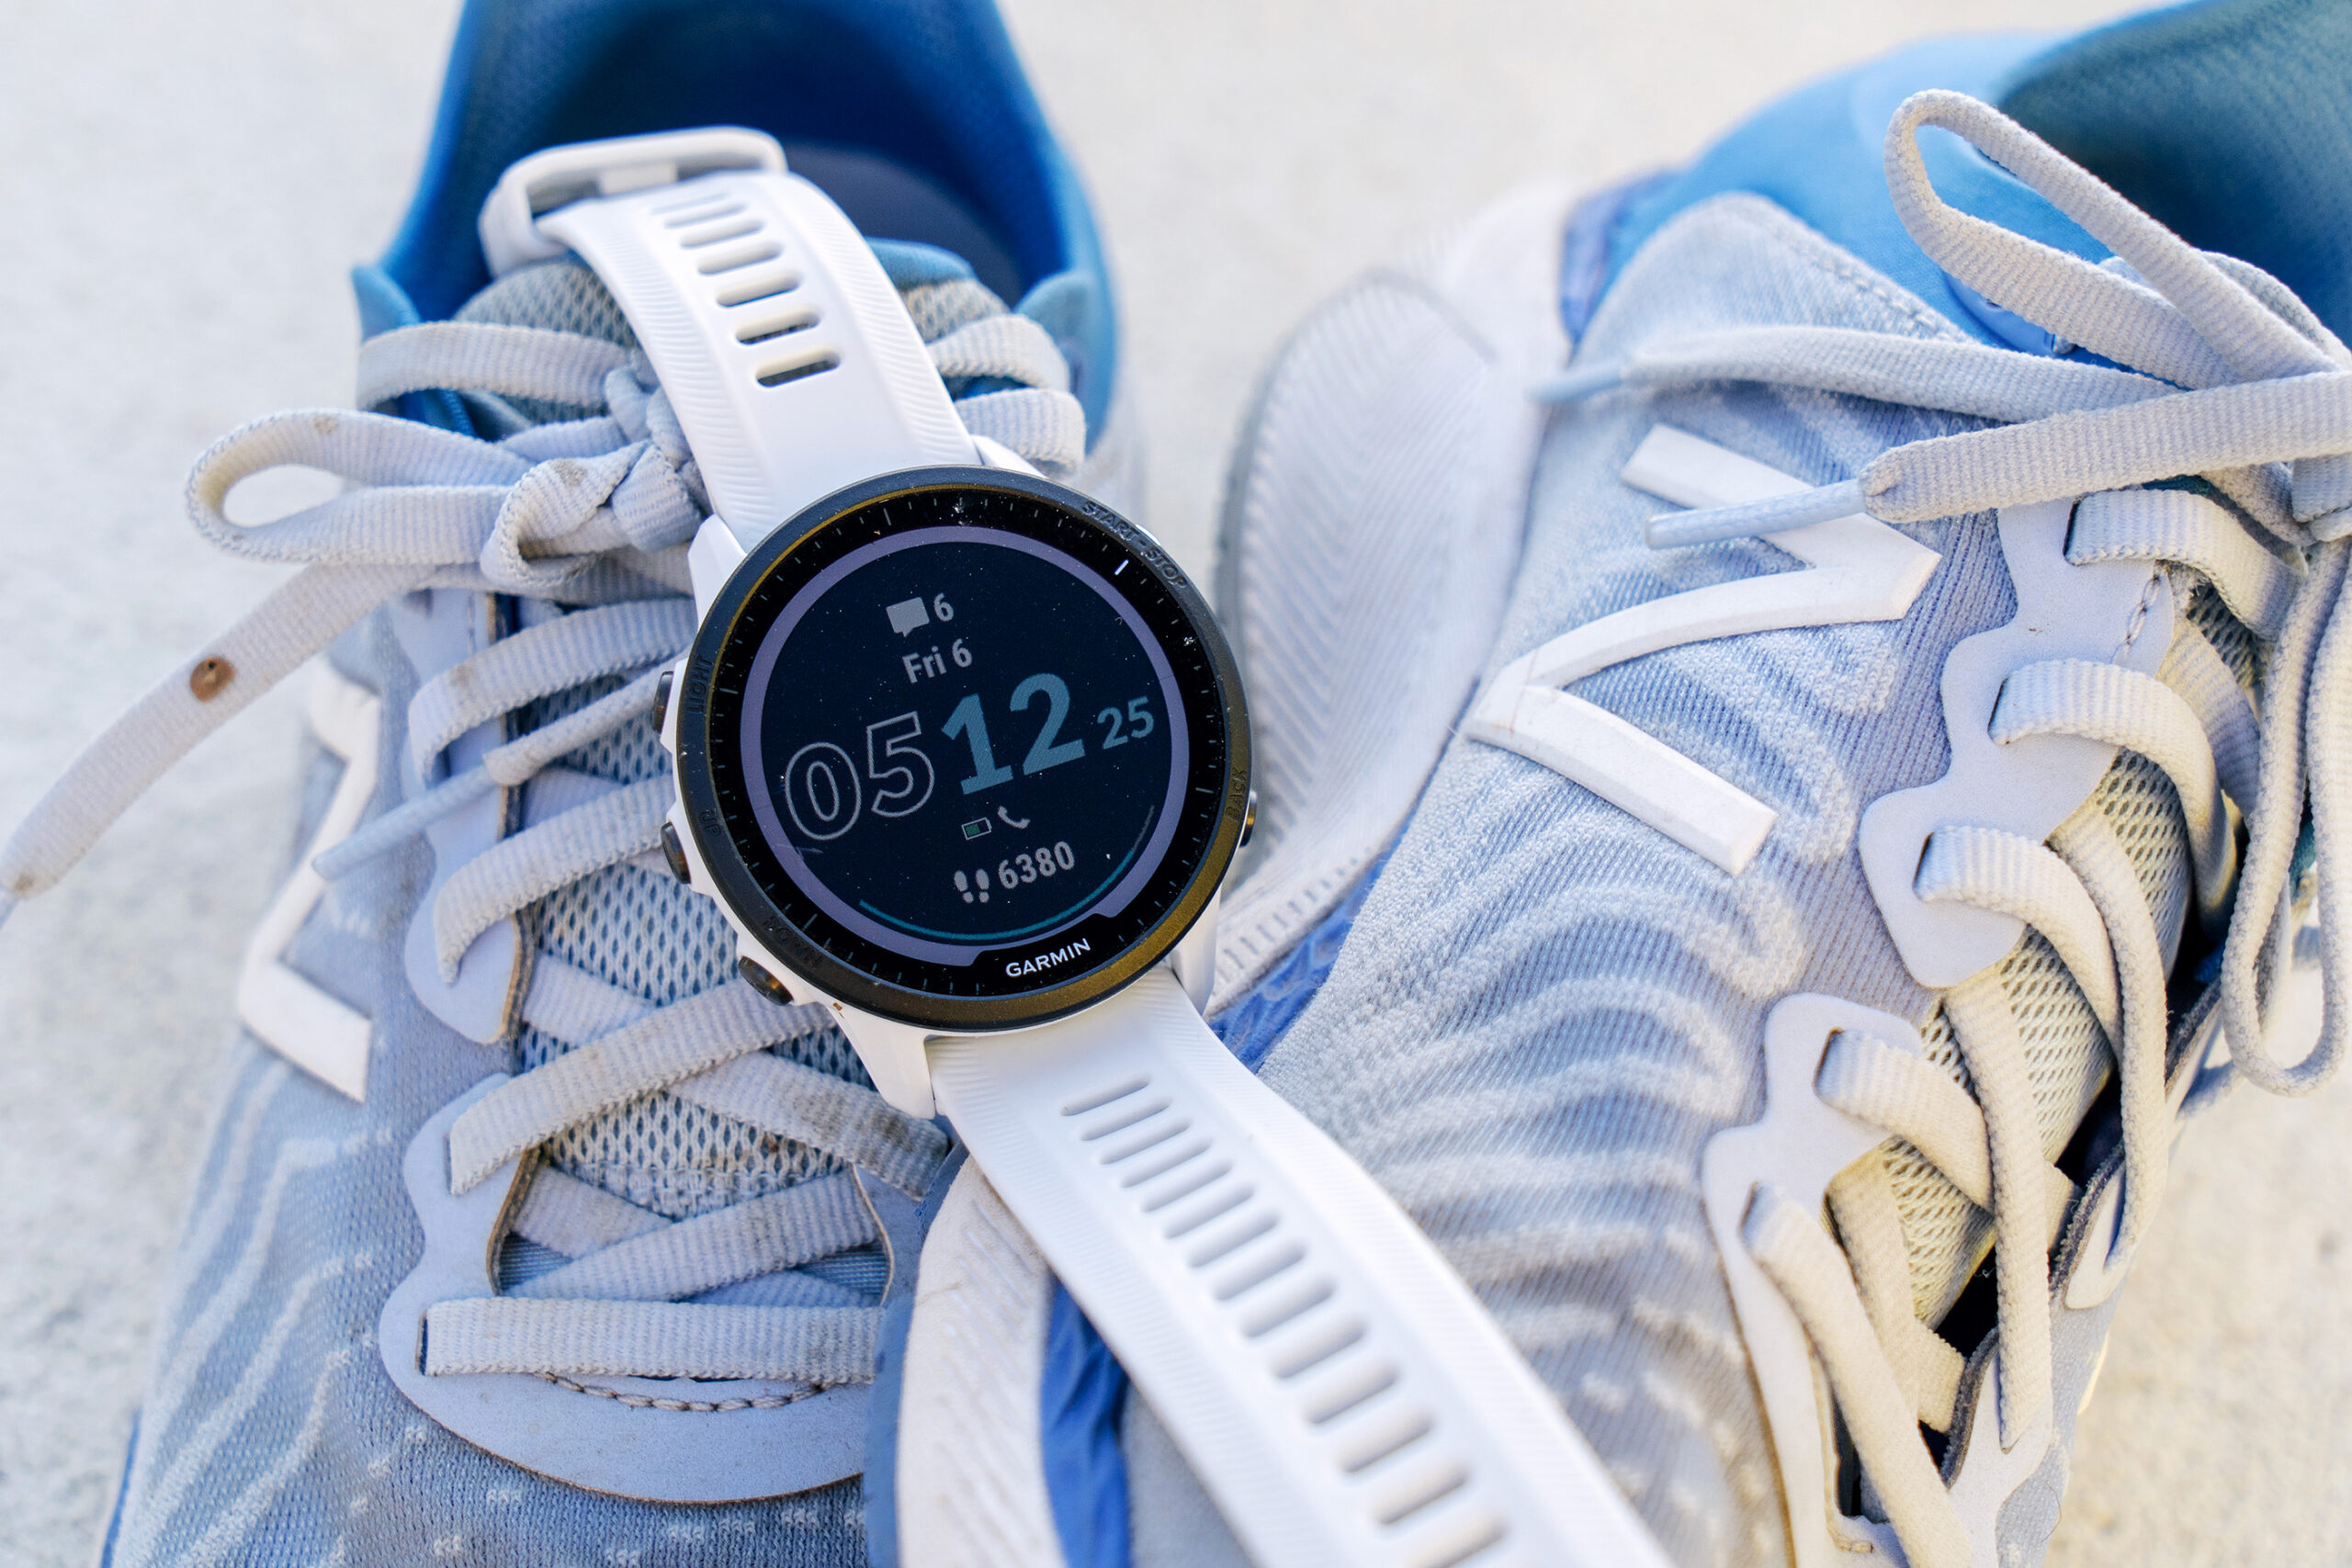 Garmin Forerunner 955 Solar running watch review: The power to persevere